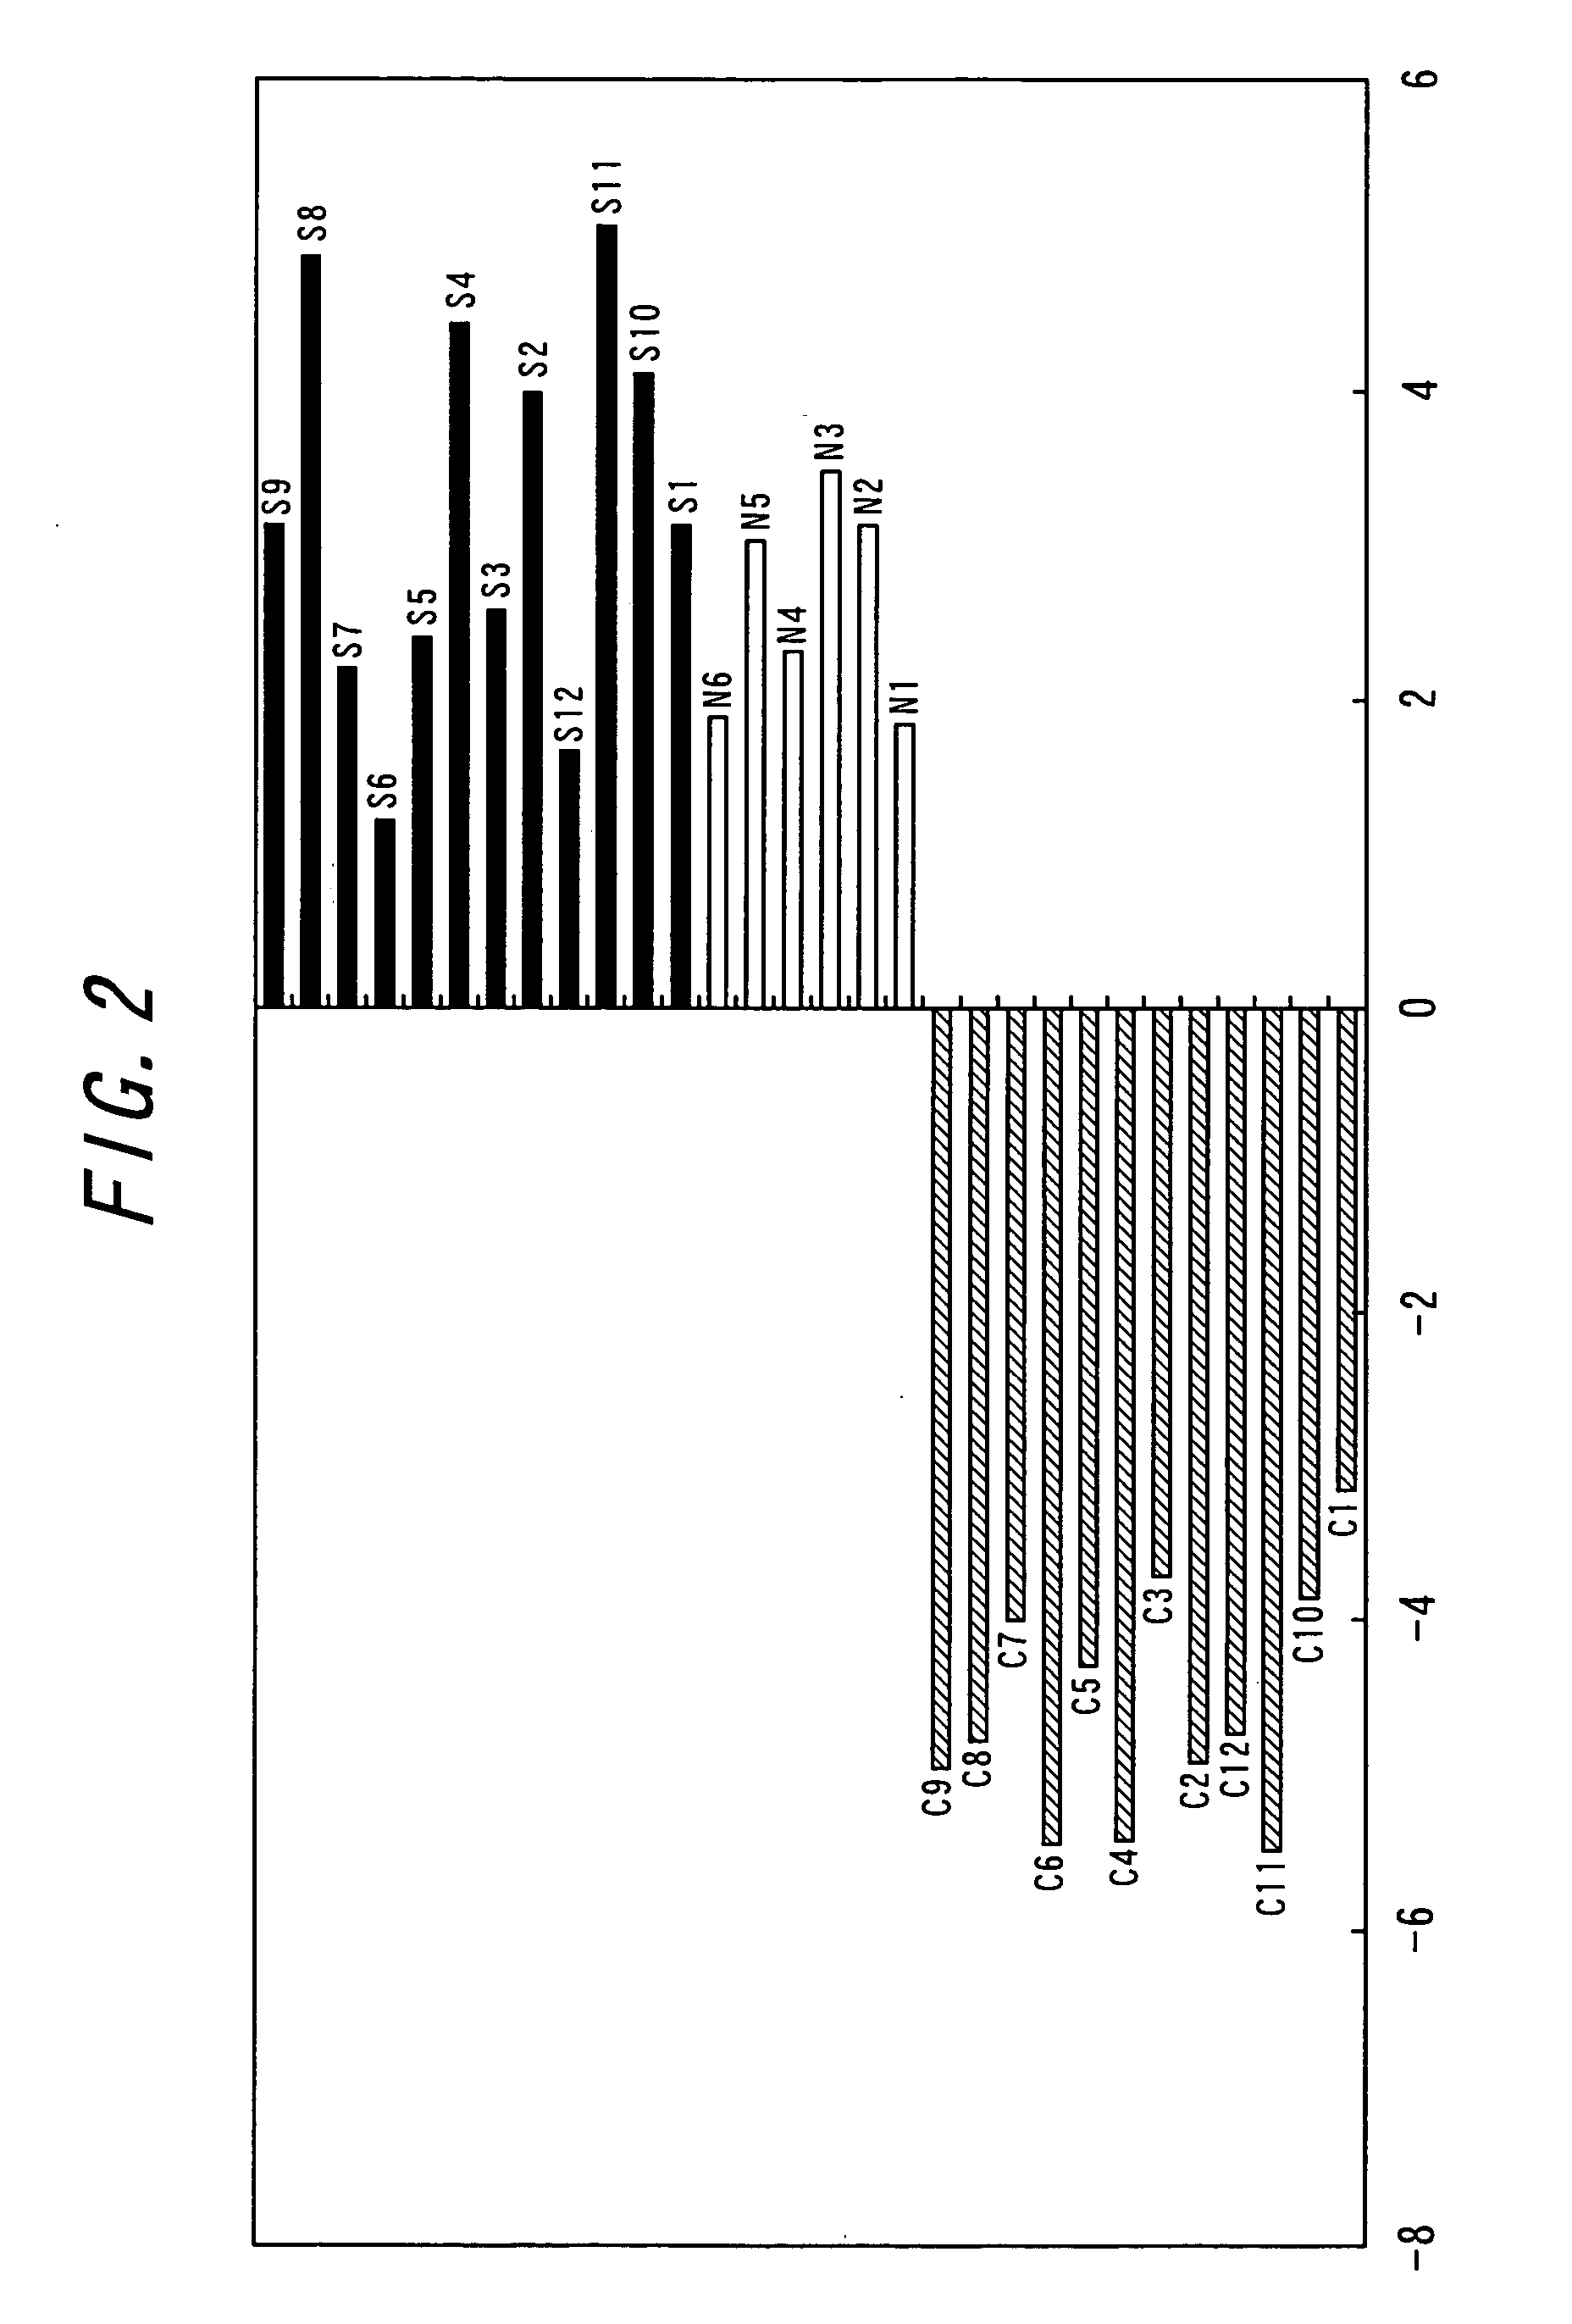 Method of diagnosing integration dysfunction syndrome using blood